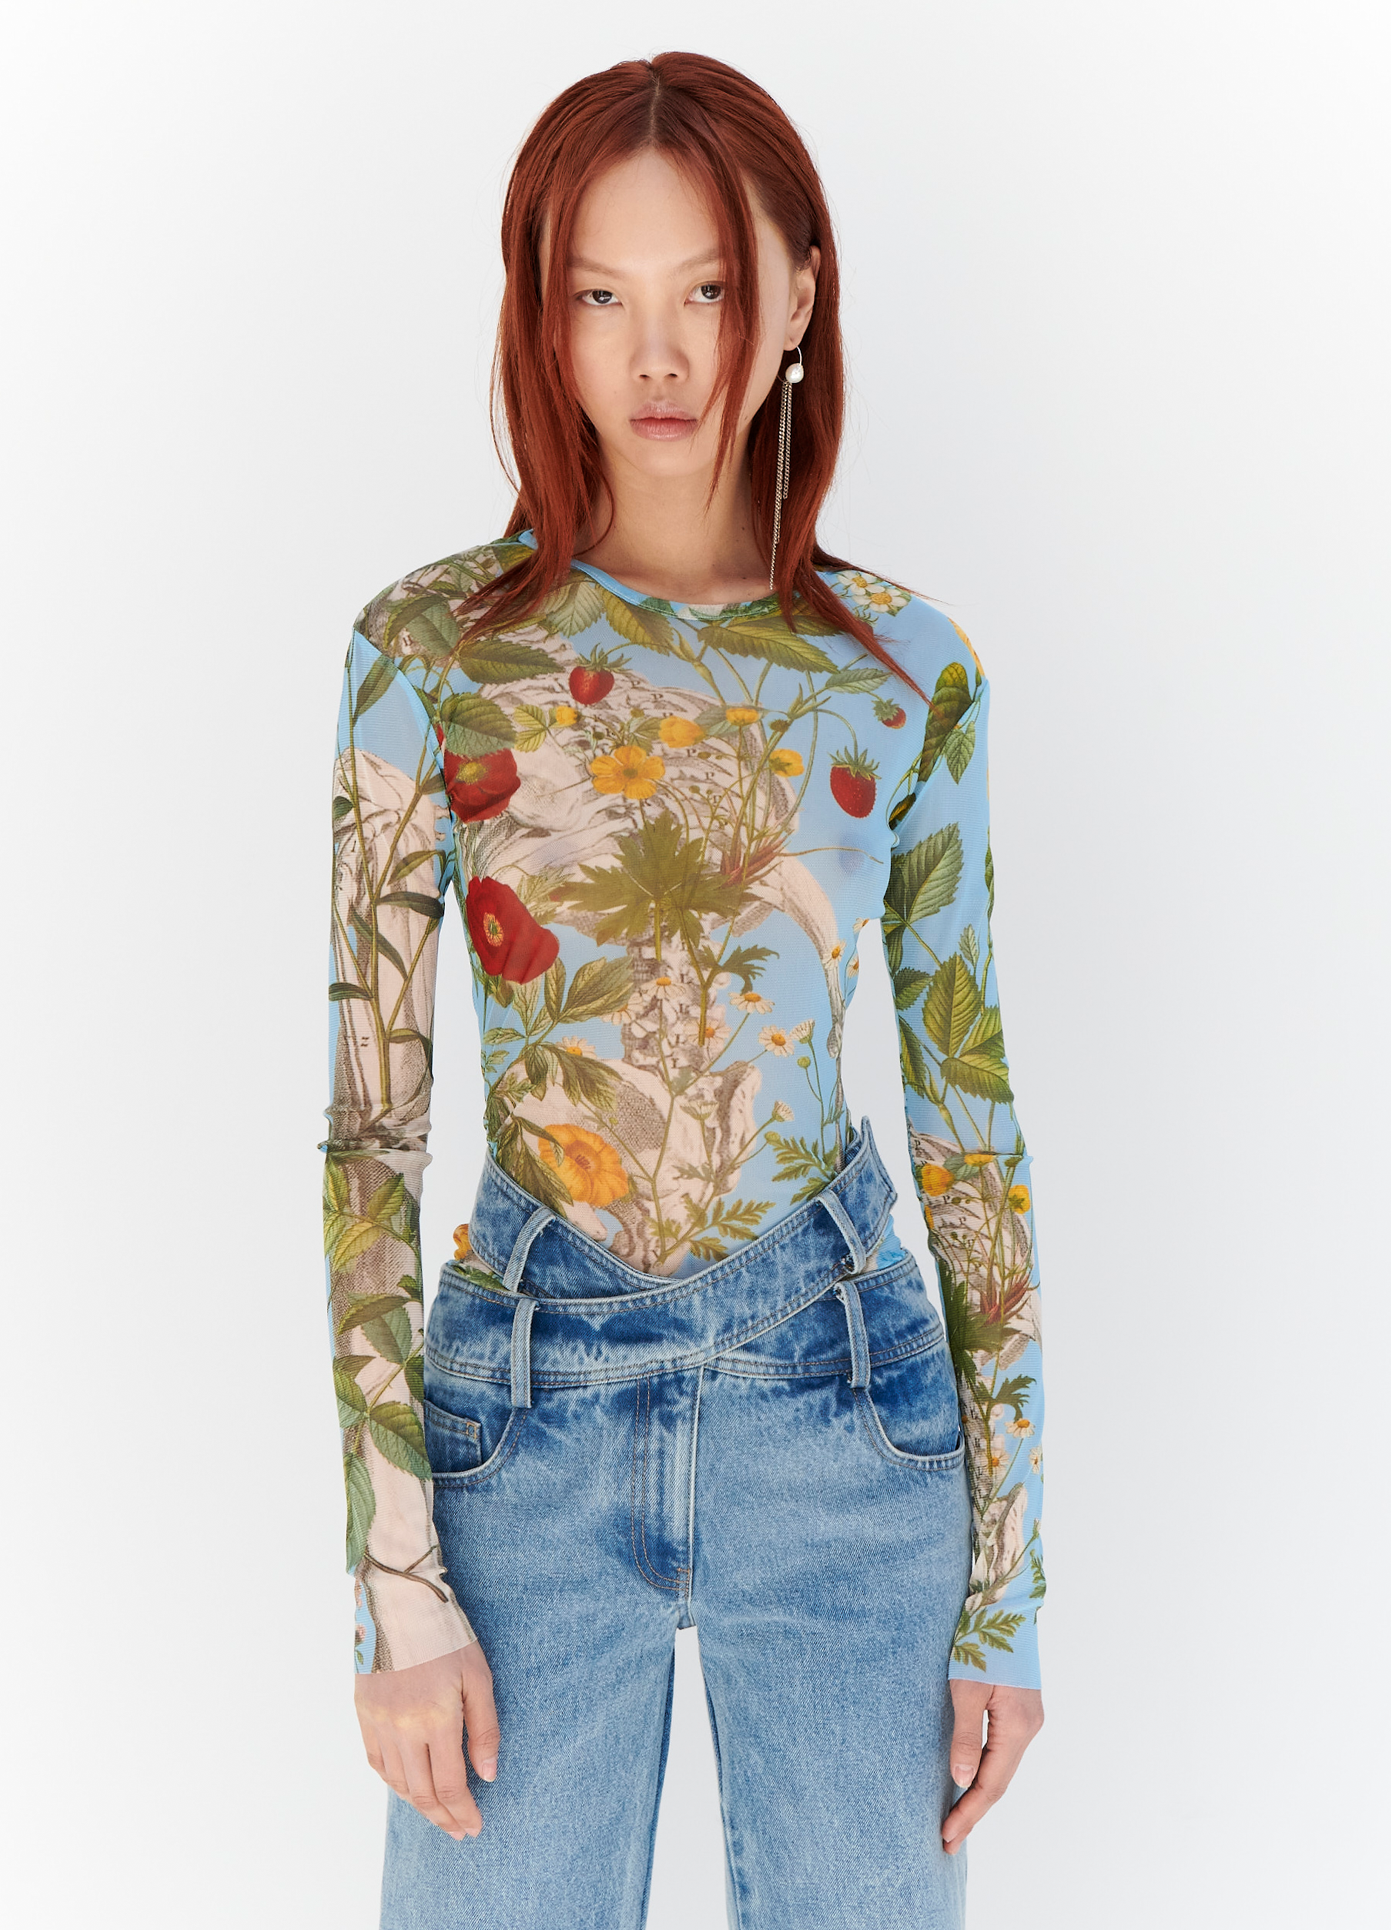 MONSE Floral Skeleton Print Mesh Top in Blue Multi on model front view